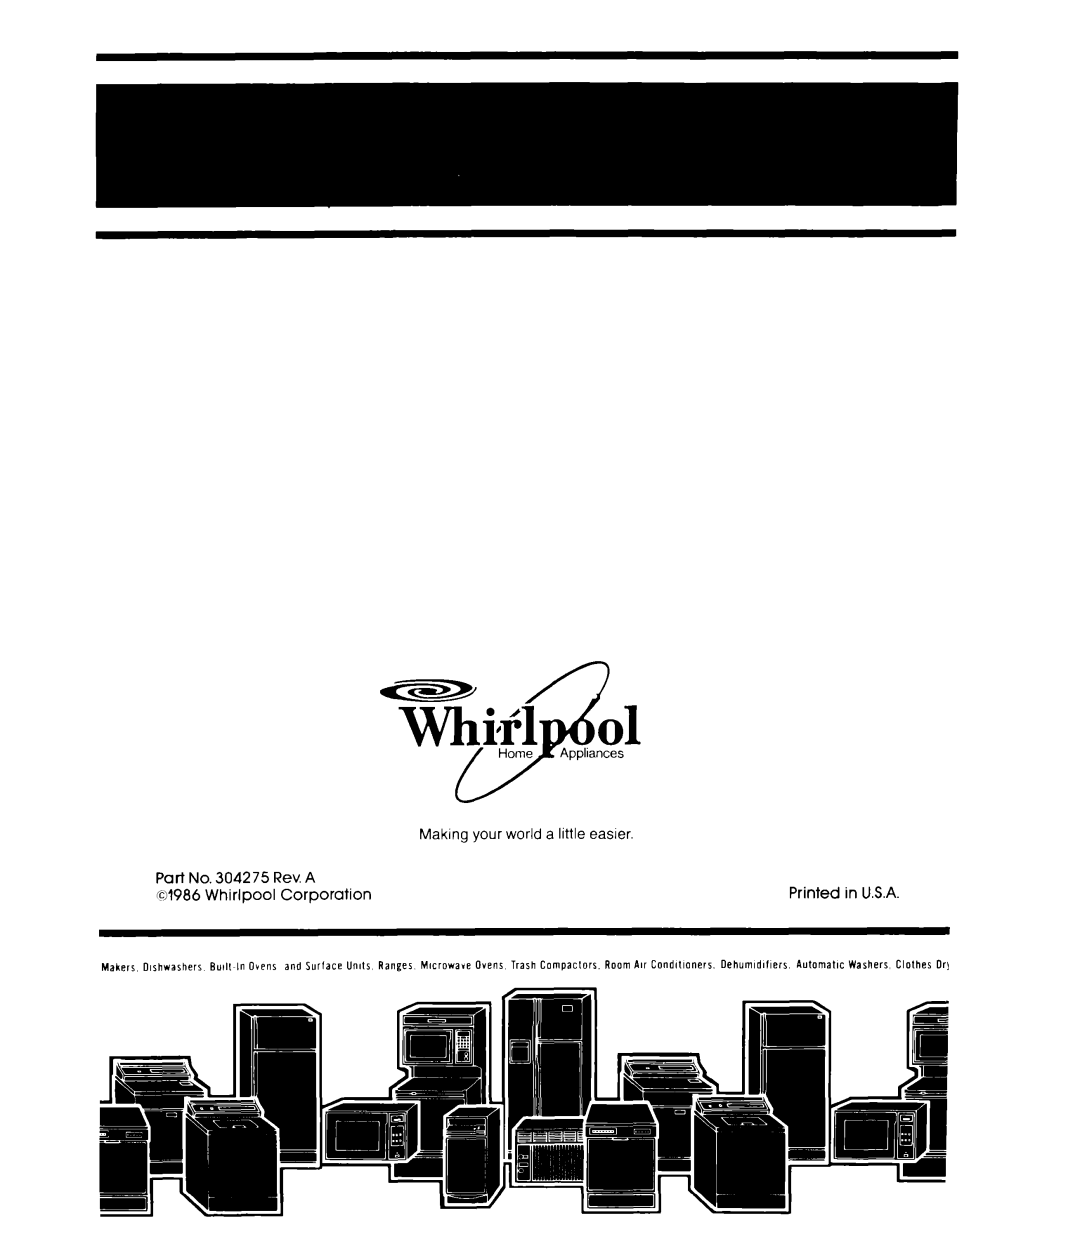 Whirlpool DU4000XR manual in U.S.A, al986, Whirlpool, Corporation, Making your world a little easier, Printed, Automatic 